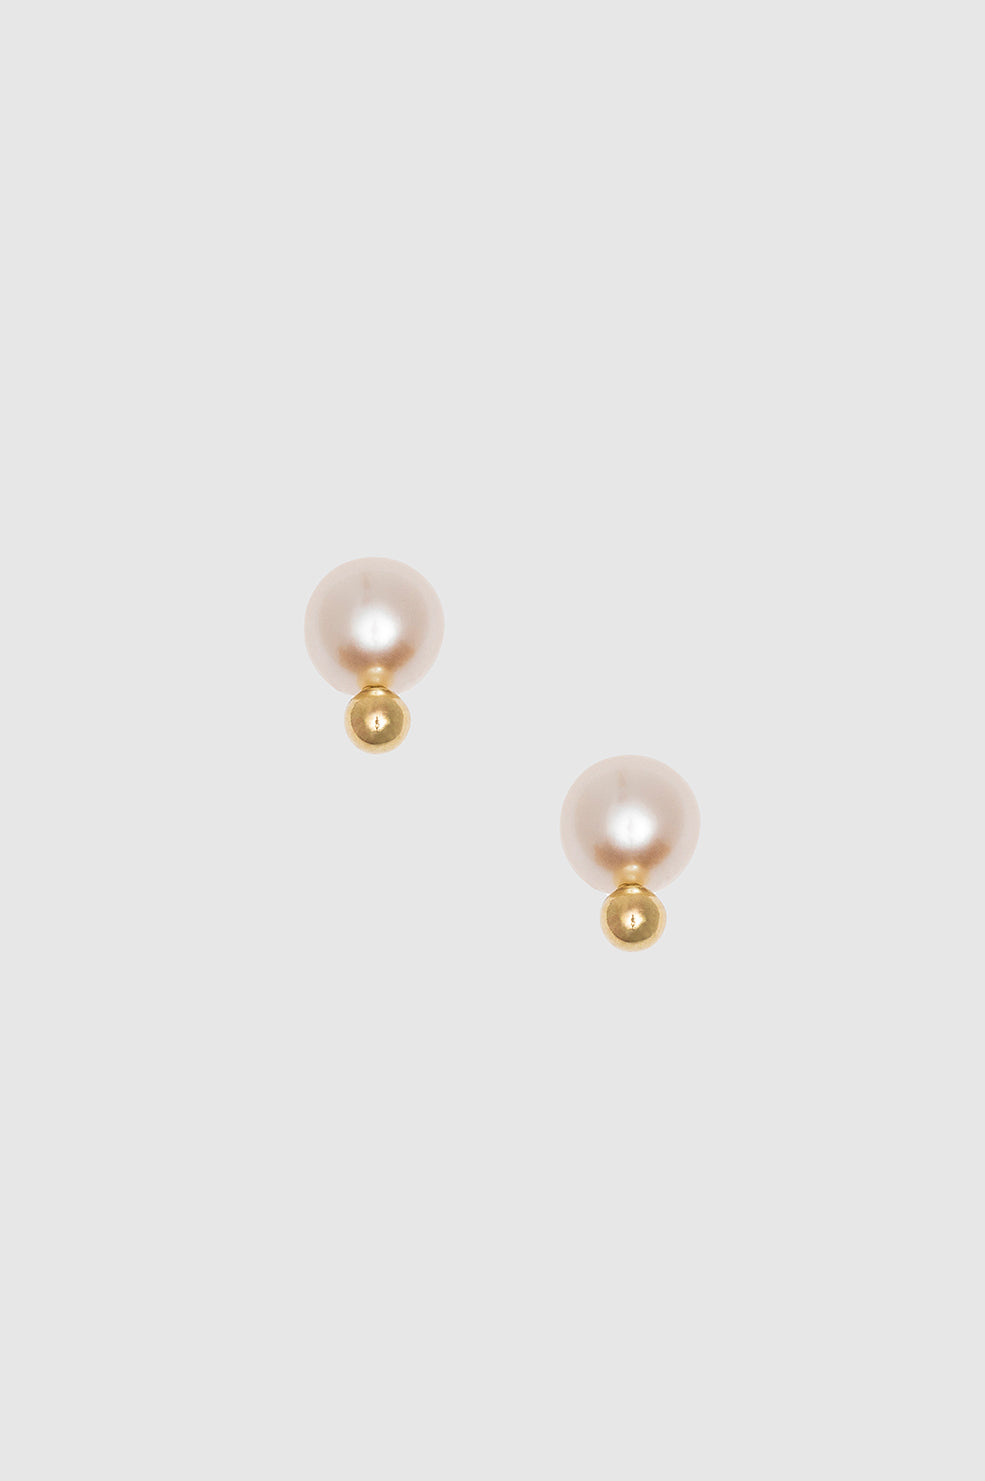 Anine Bing | Textured Button Stud Earrings - 14K Gold